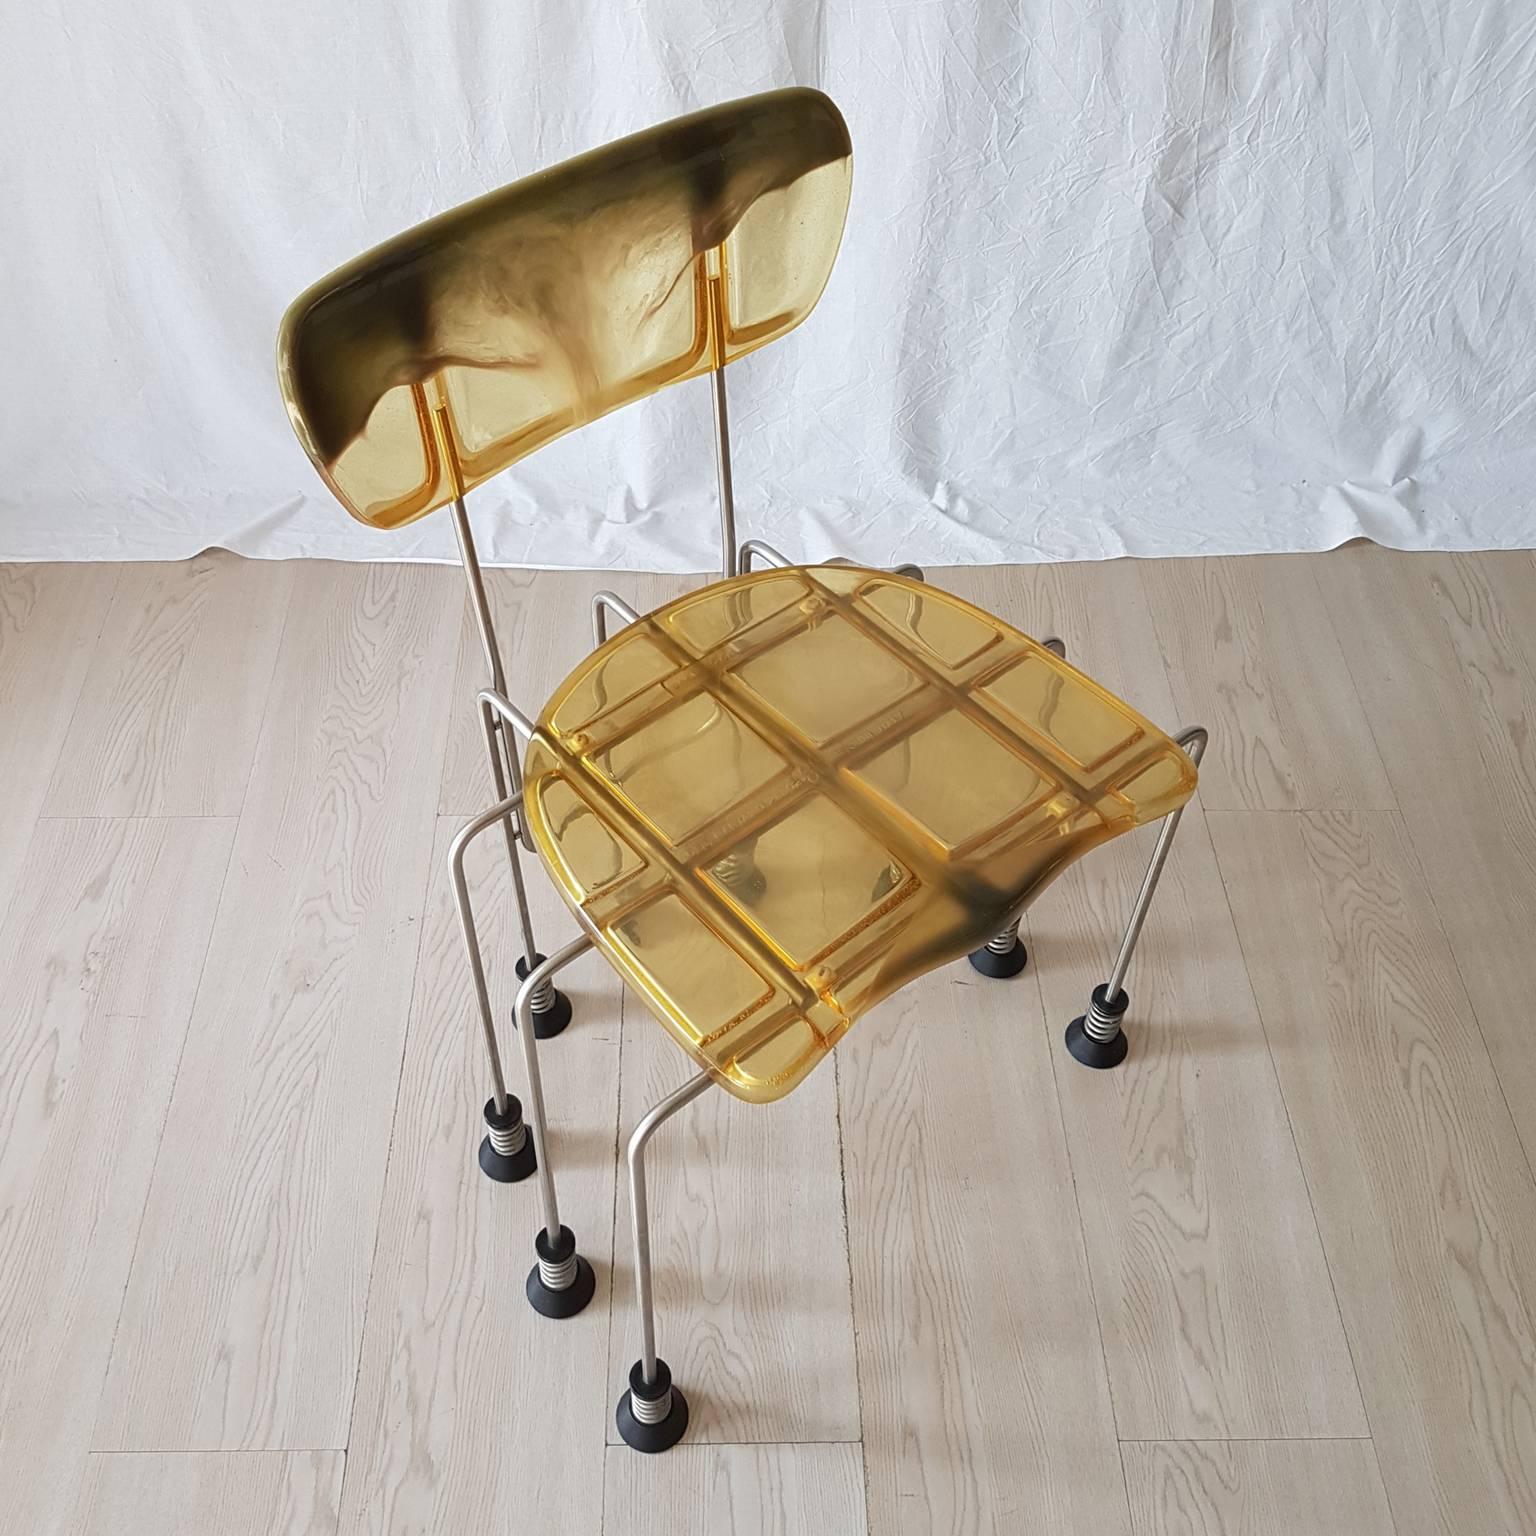 Broawday nine legs chair is a part of a limited edition of 1992 designed (total item: 1000) by Gaetano Pesce for Bernini manufacturer.
The special part on this model is that this has nine legs instead of four to the normal examples.
The chair has